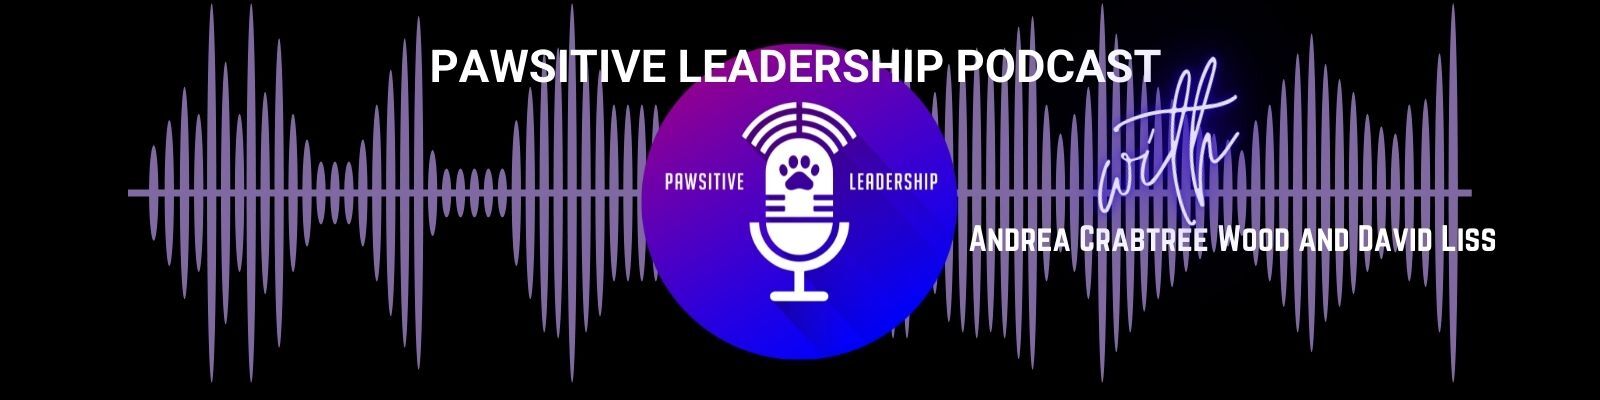 PAWSitive Leadership Podcast